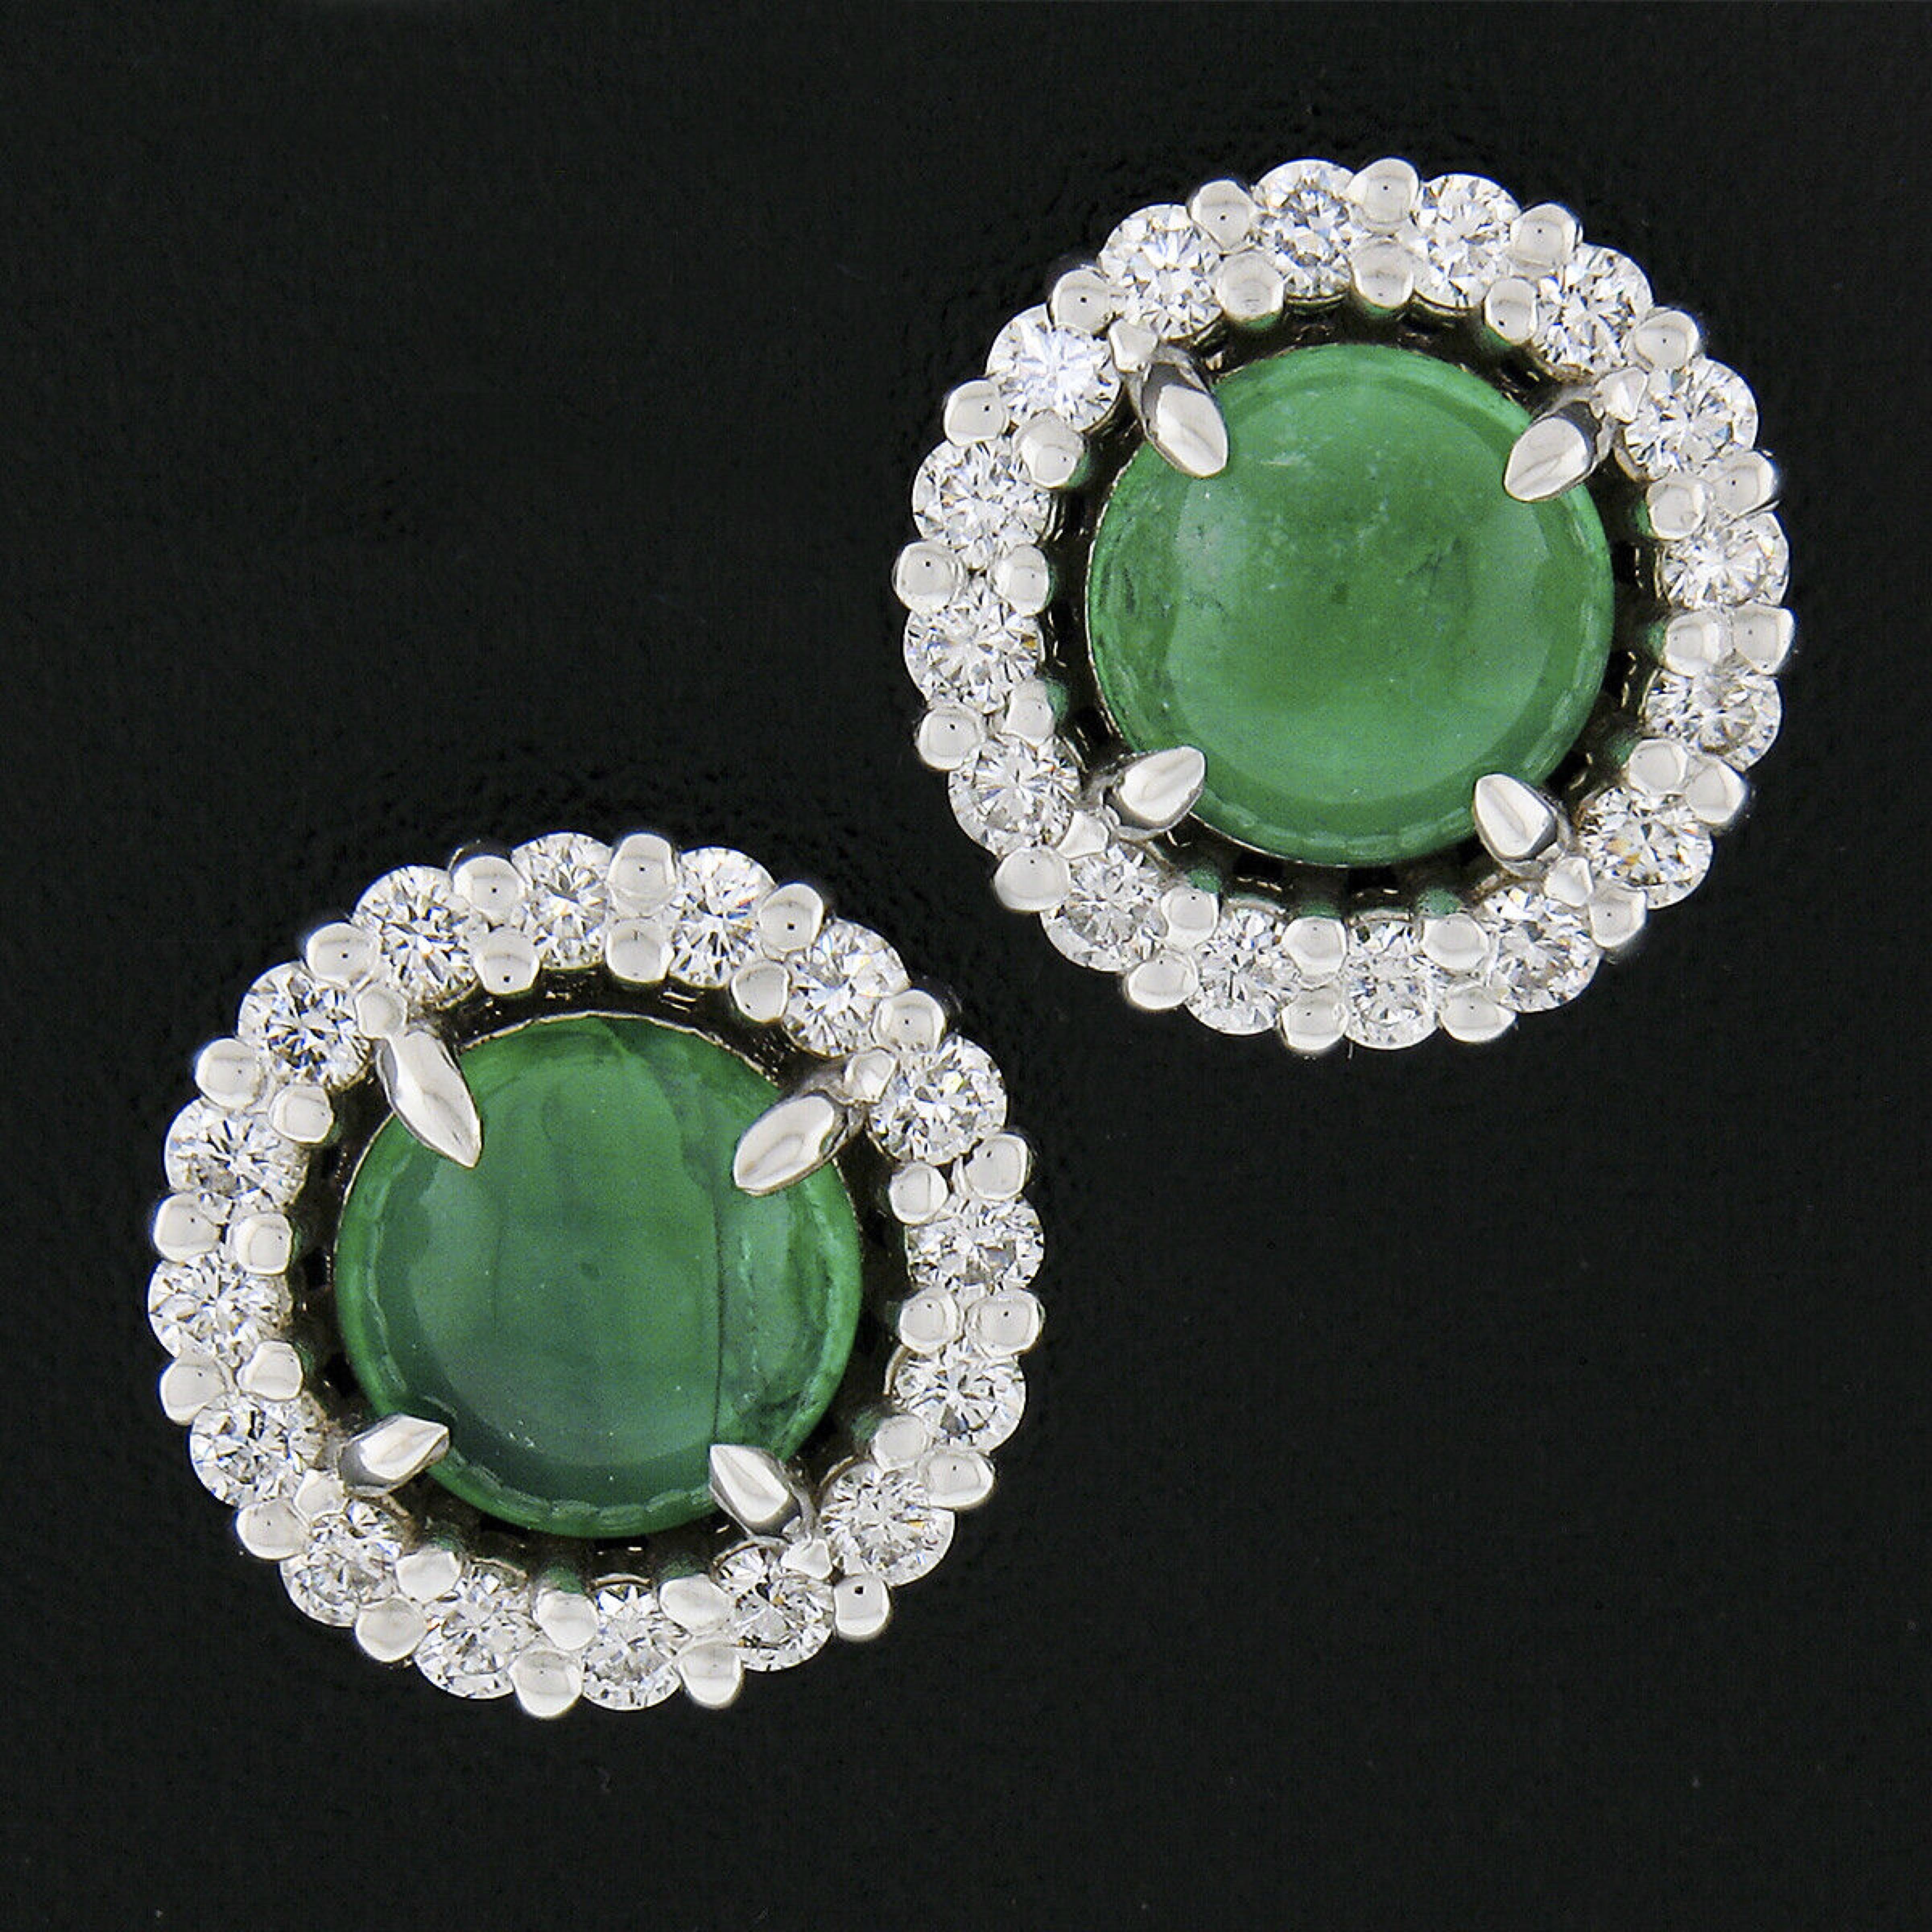 This gorgeous pair of emerald and diamond halo stud earrings is newly crafted in solid 18k white gold. Each earring features a gorgeous round cabochon cut natural emerald stone neatly prong set at its center, and are well matched displaying the most